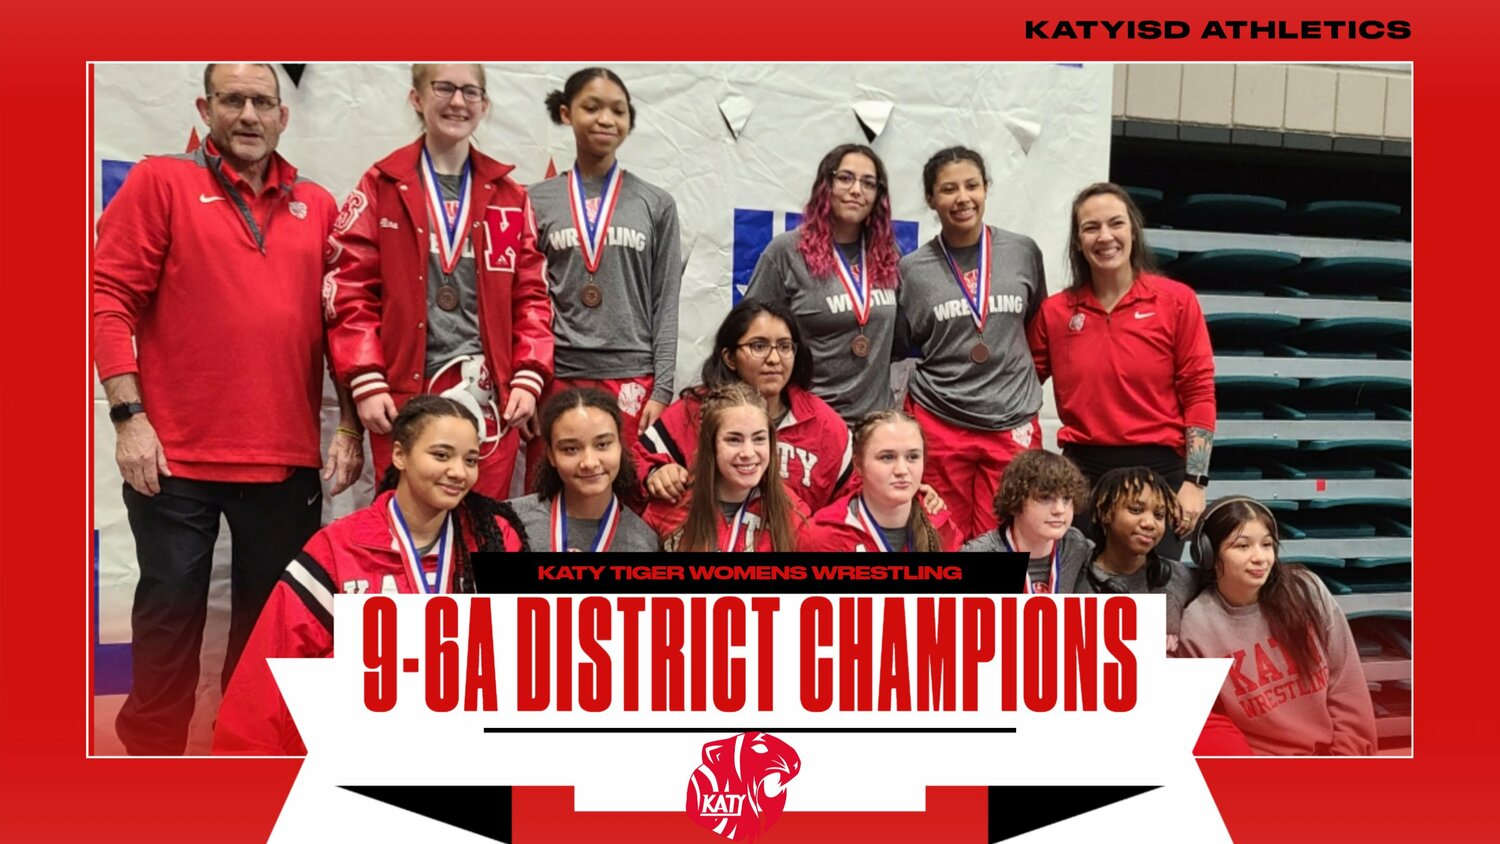 The Katy girls took home the team gold at the District 9-6A meet at the Merrell Center.